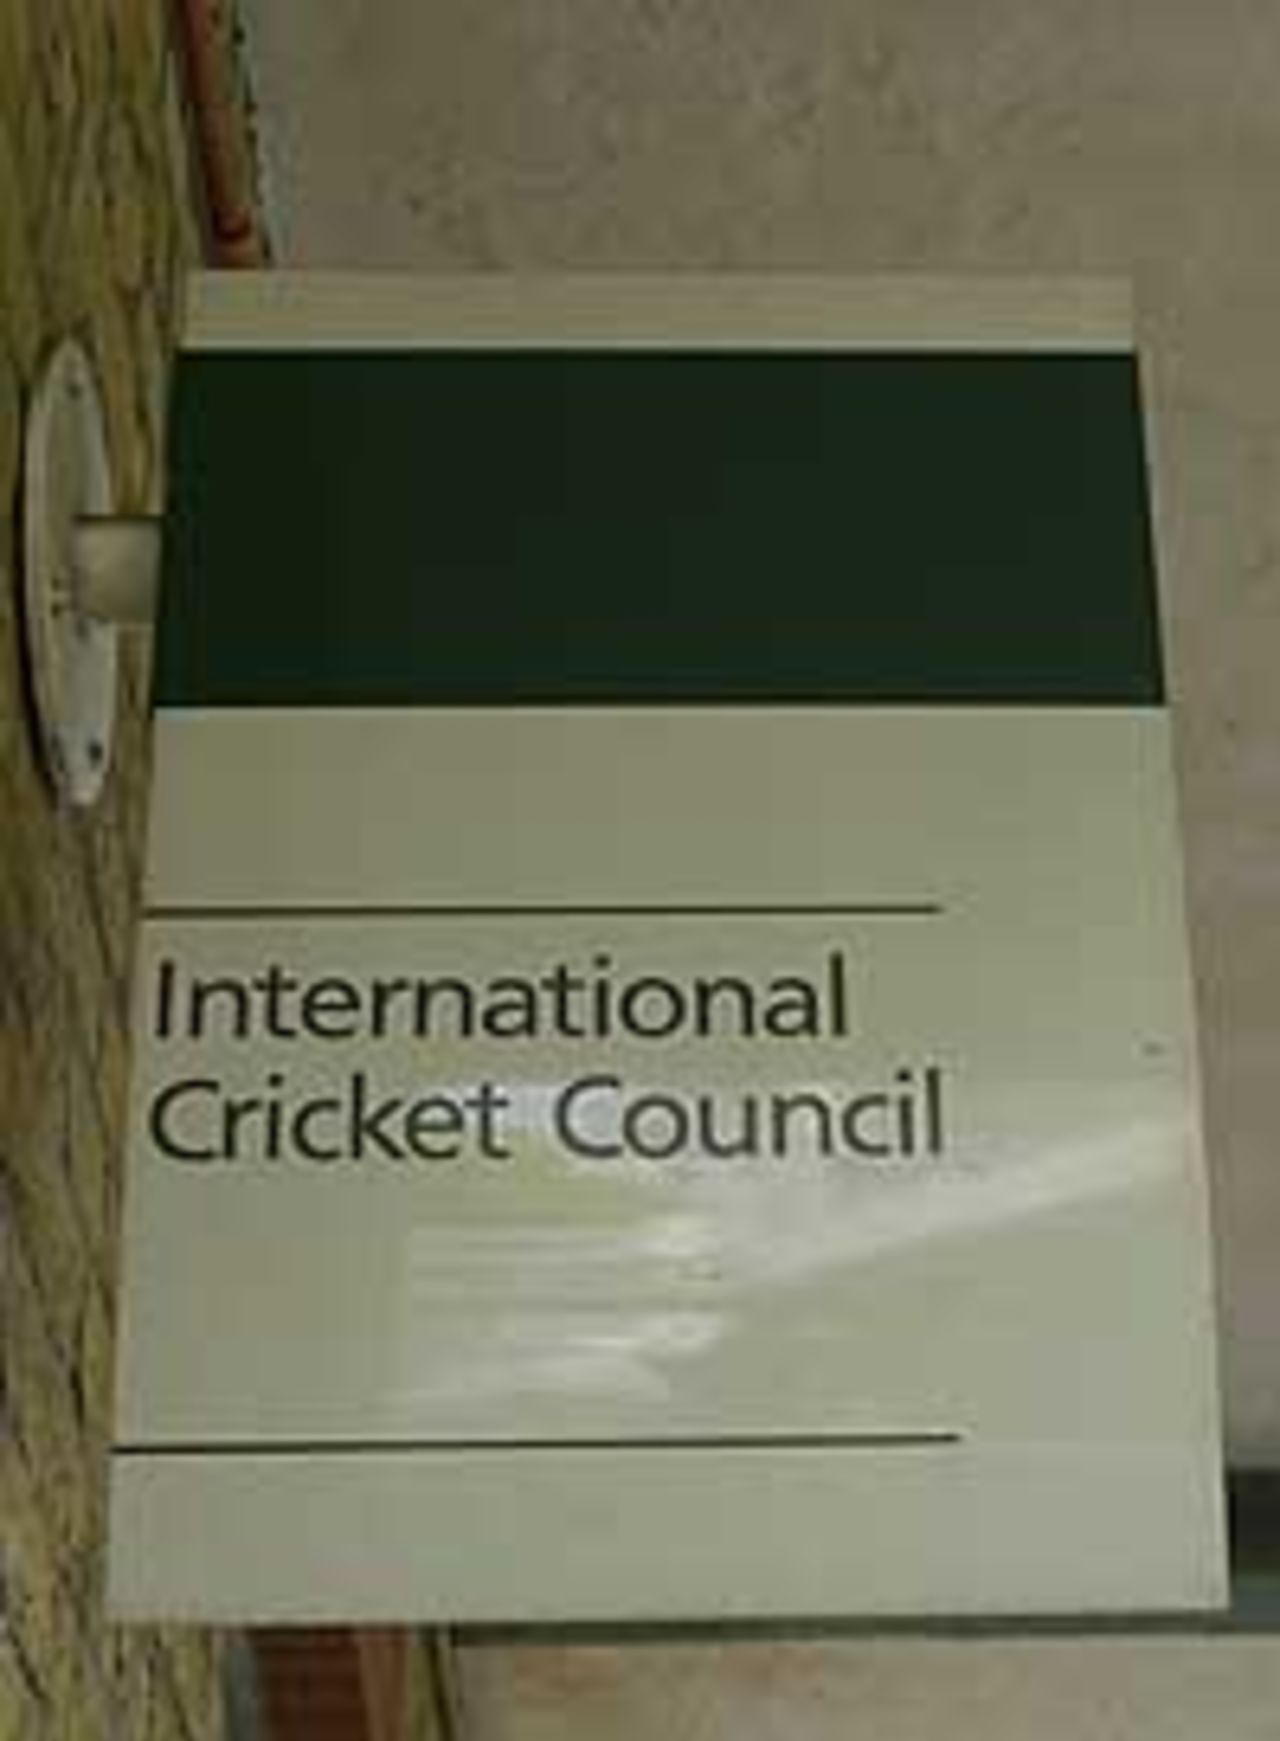 Pictured outside the offices of the ICC at Lord's cricket ground